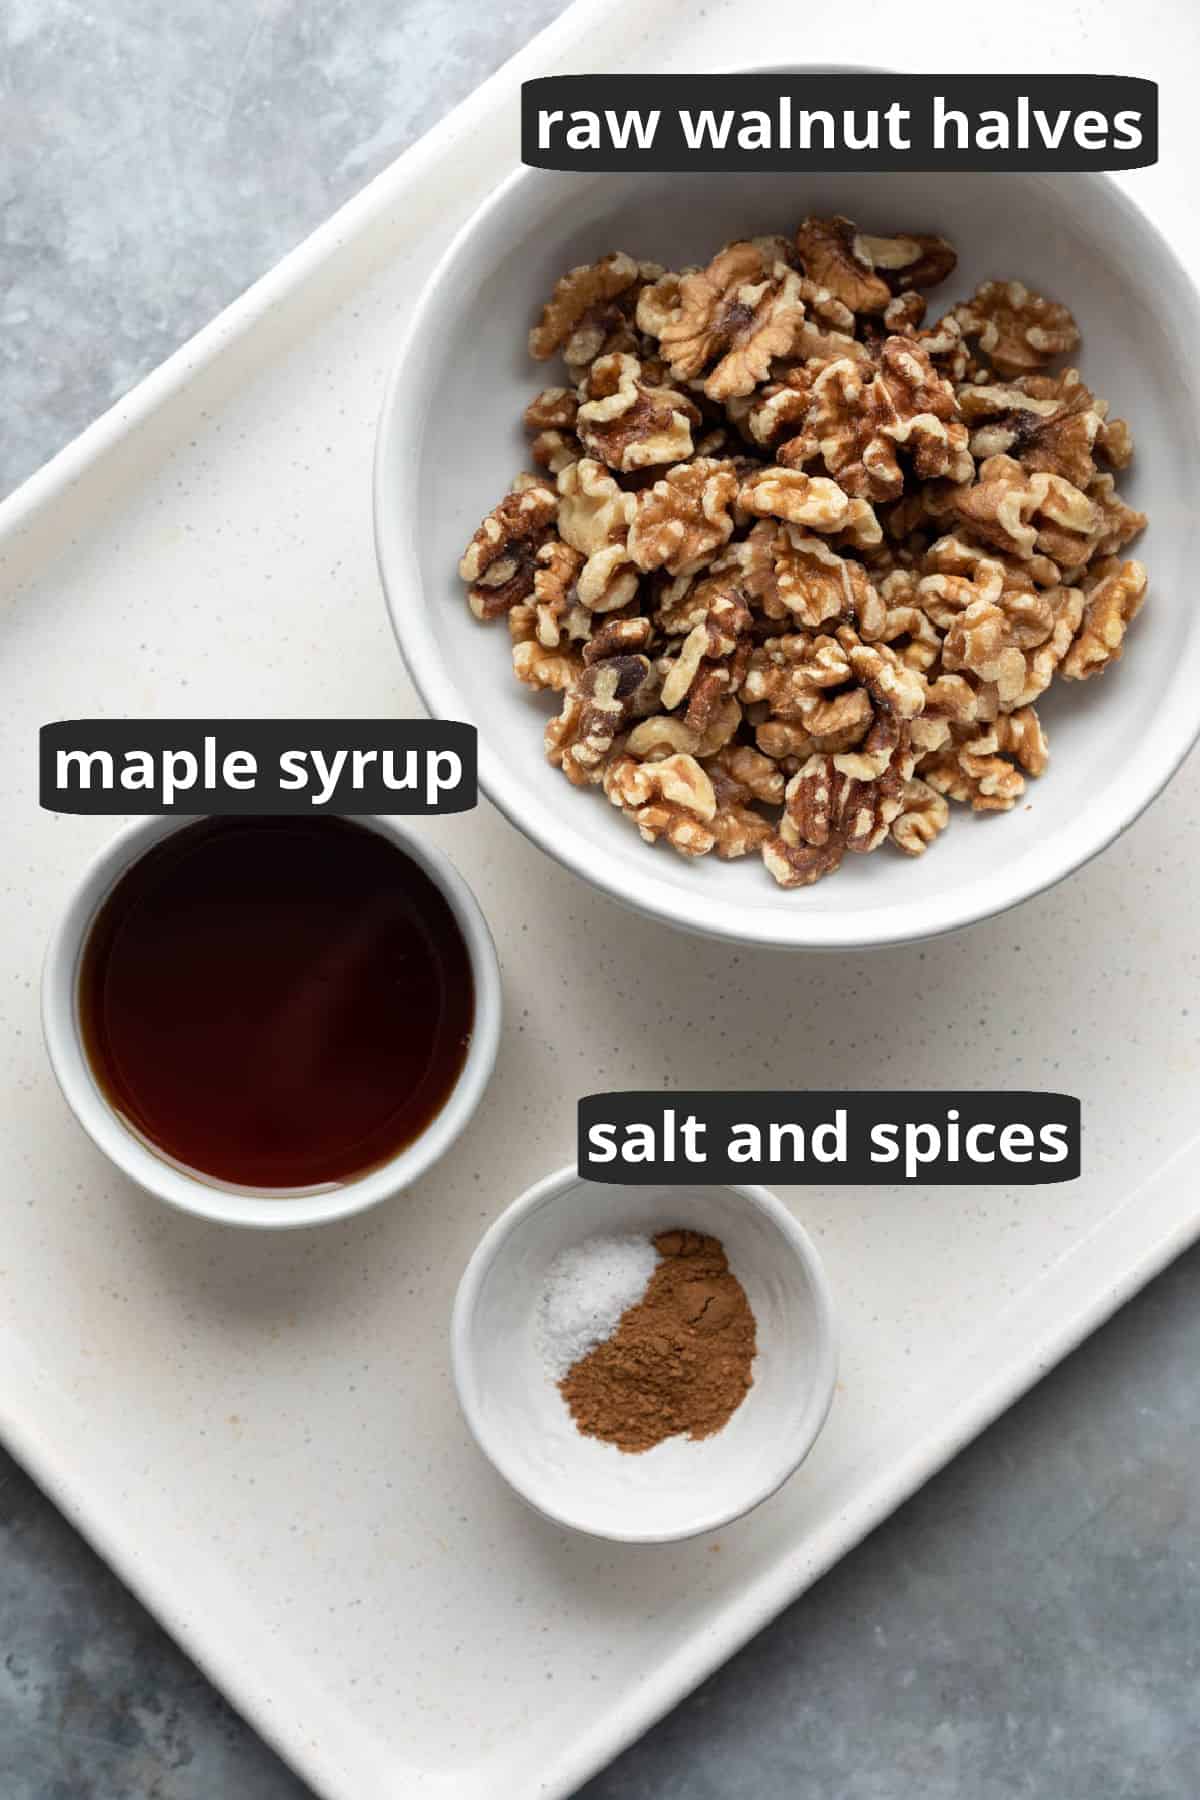 A labeled photo of the 3 ingredients needed for glazed walnuts.